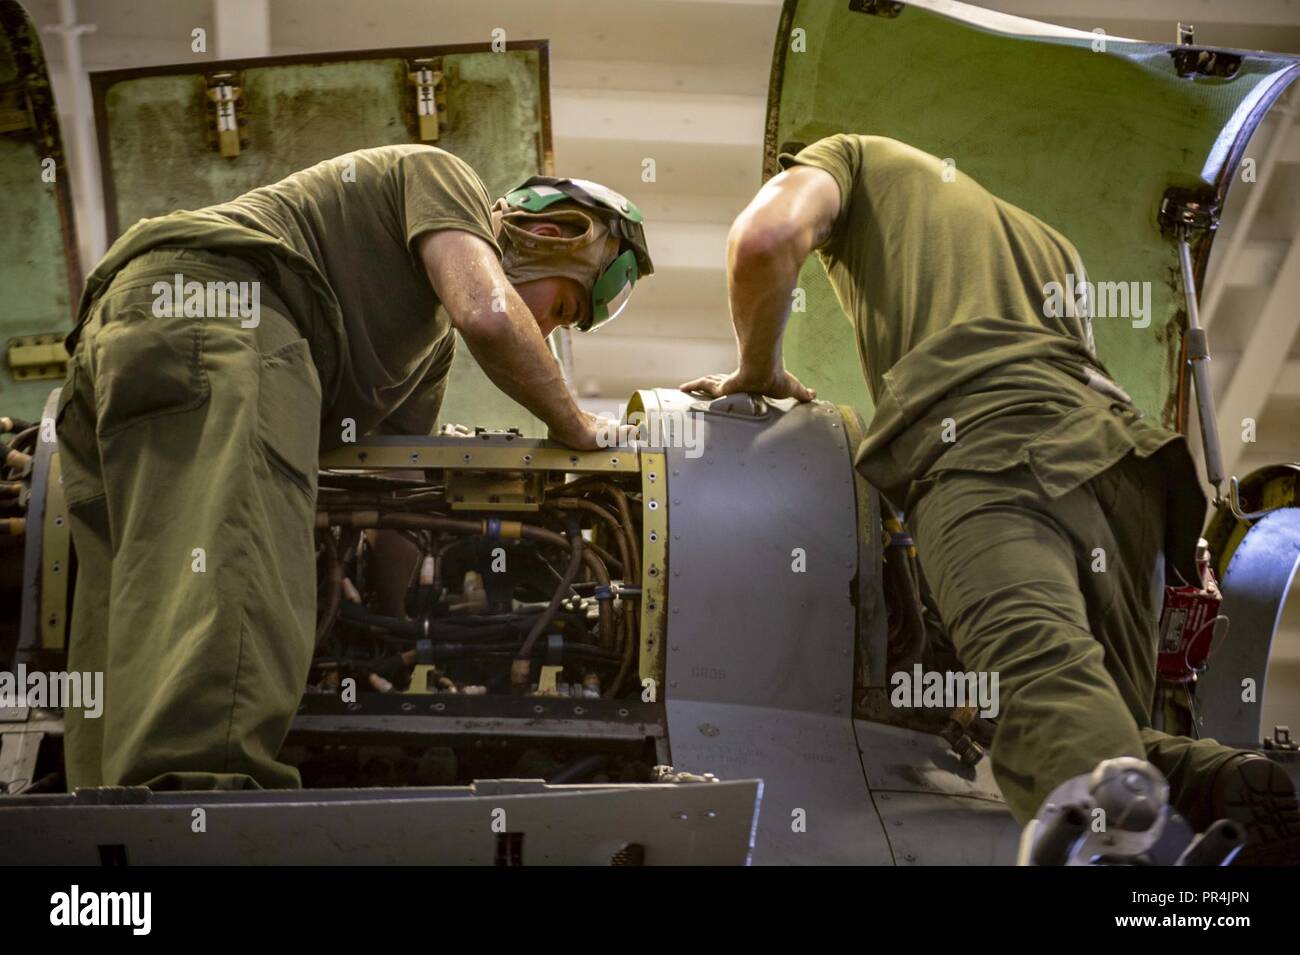 OF ADEN (Sept. 13 2018) – Marine Corps Staff Sgt. Javier Castillo and Marine Corps Lance Cpl. Brandon Barnett perform maintenance on an MV-22 Osprey tiltrotor aircraft, attached to the “Sea Elks” of Marine Medium Tiltrotor Squadron (VMM) 166 (REIN), aboard Wasp-class amphibious assault ship USS Essex (LHD 2) during a regularly scheduled deployment of Essex Amphibious Ready Group (ARG) and 13th Marine Expeditionary Unit (MEU). The Essex ARG/13th MEU is a lethal, flexible, and persistent Navy-Marine Corps team deployed to the U.S. 5th Fleet area of operations in support of naval operations to en Stock Photo